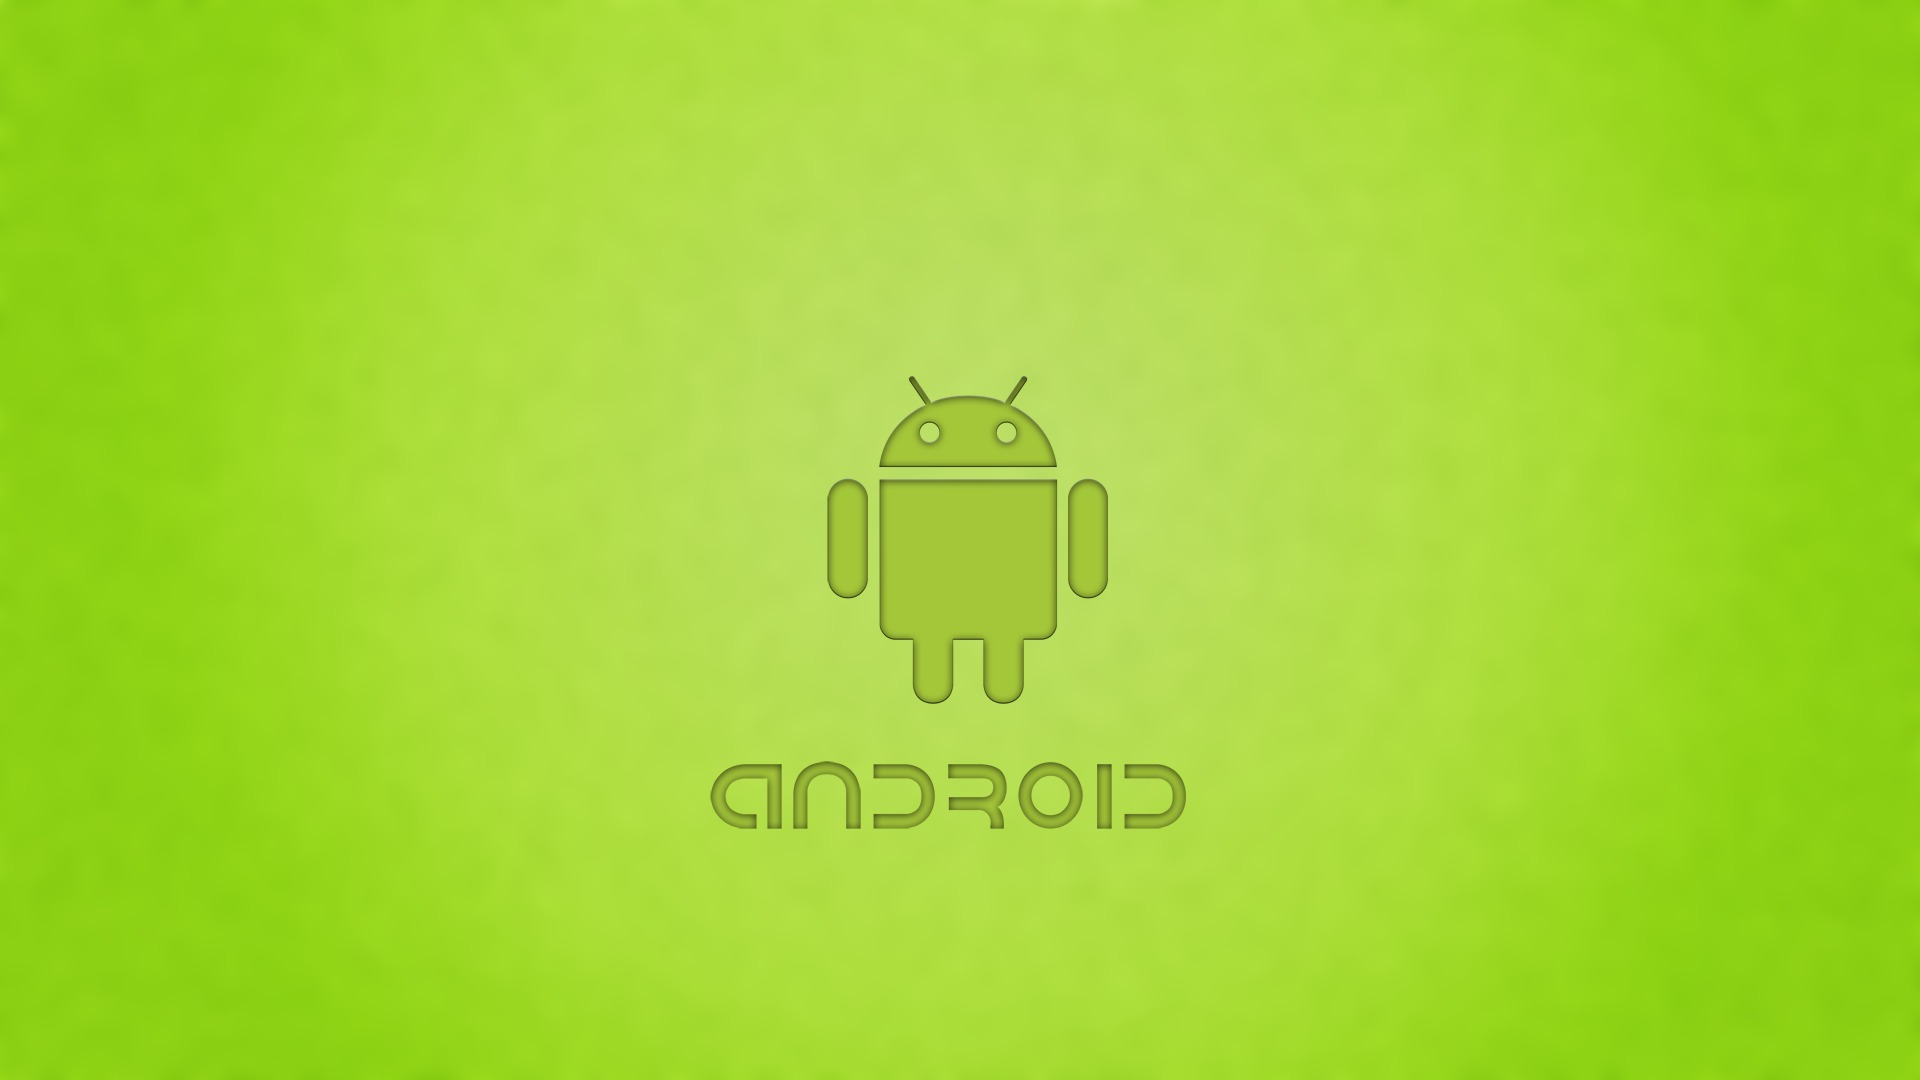 unique wallpaper for android,green,logo,yellow,font,illustration